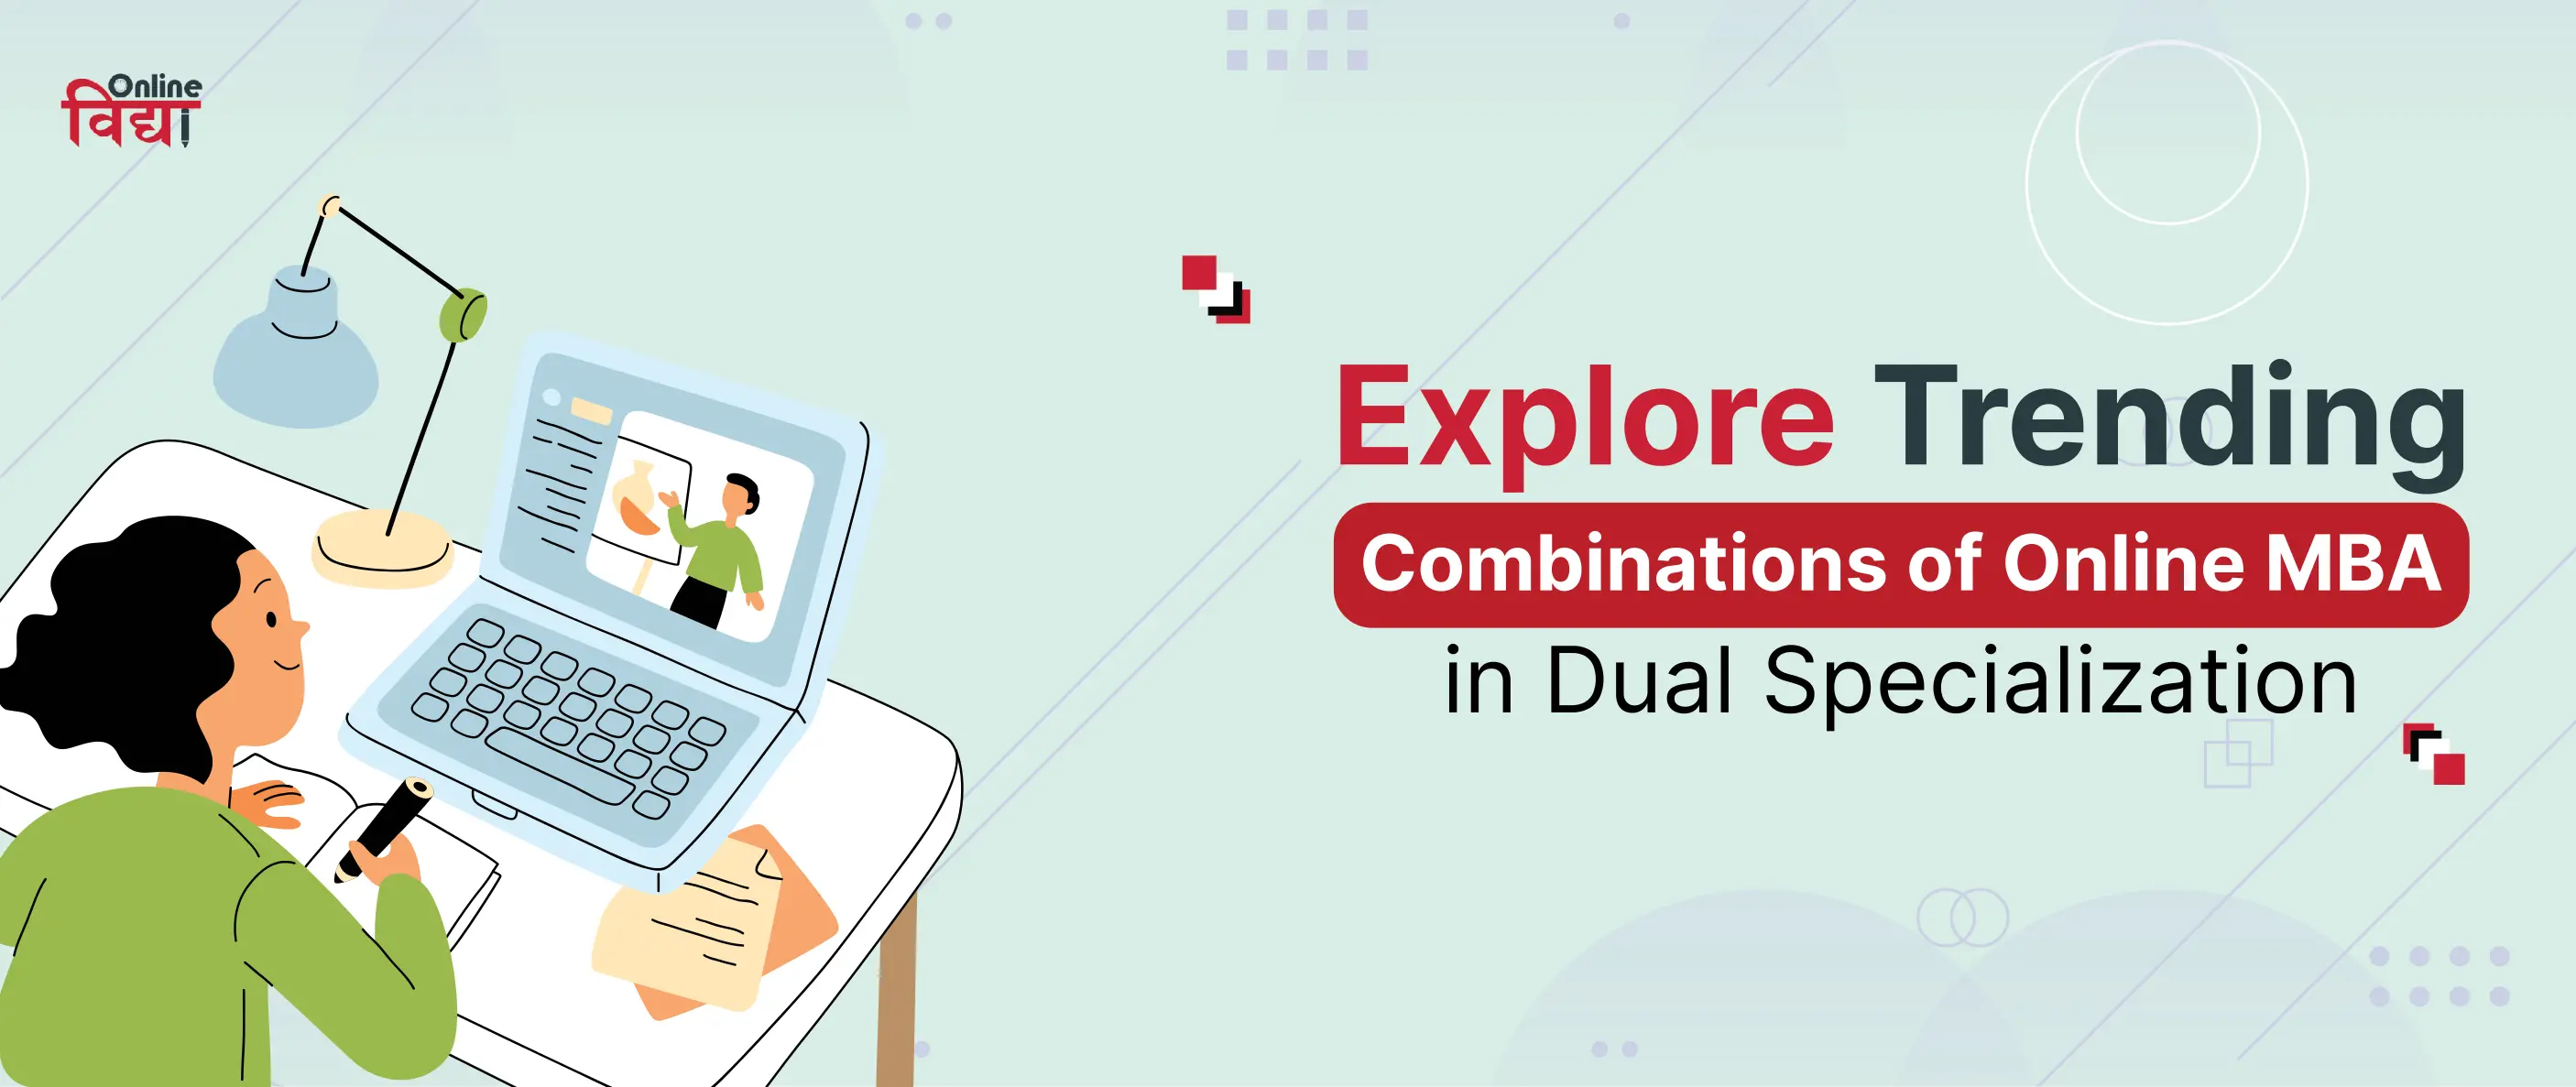 Explore Trending Combinations of Online MBA in Dual Specialization